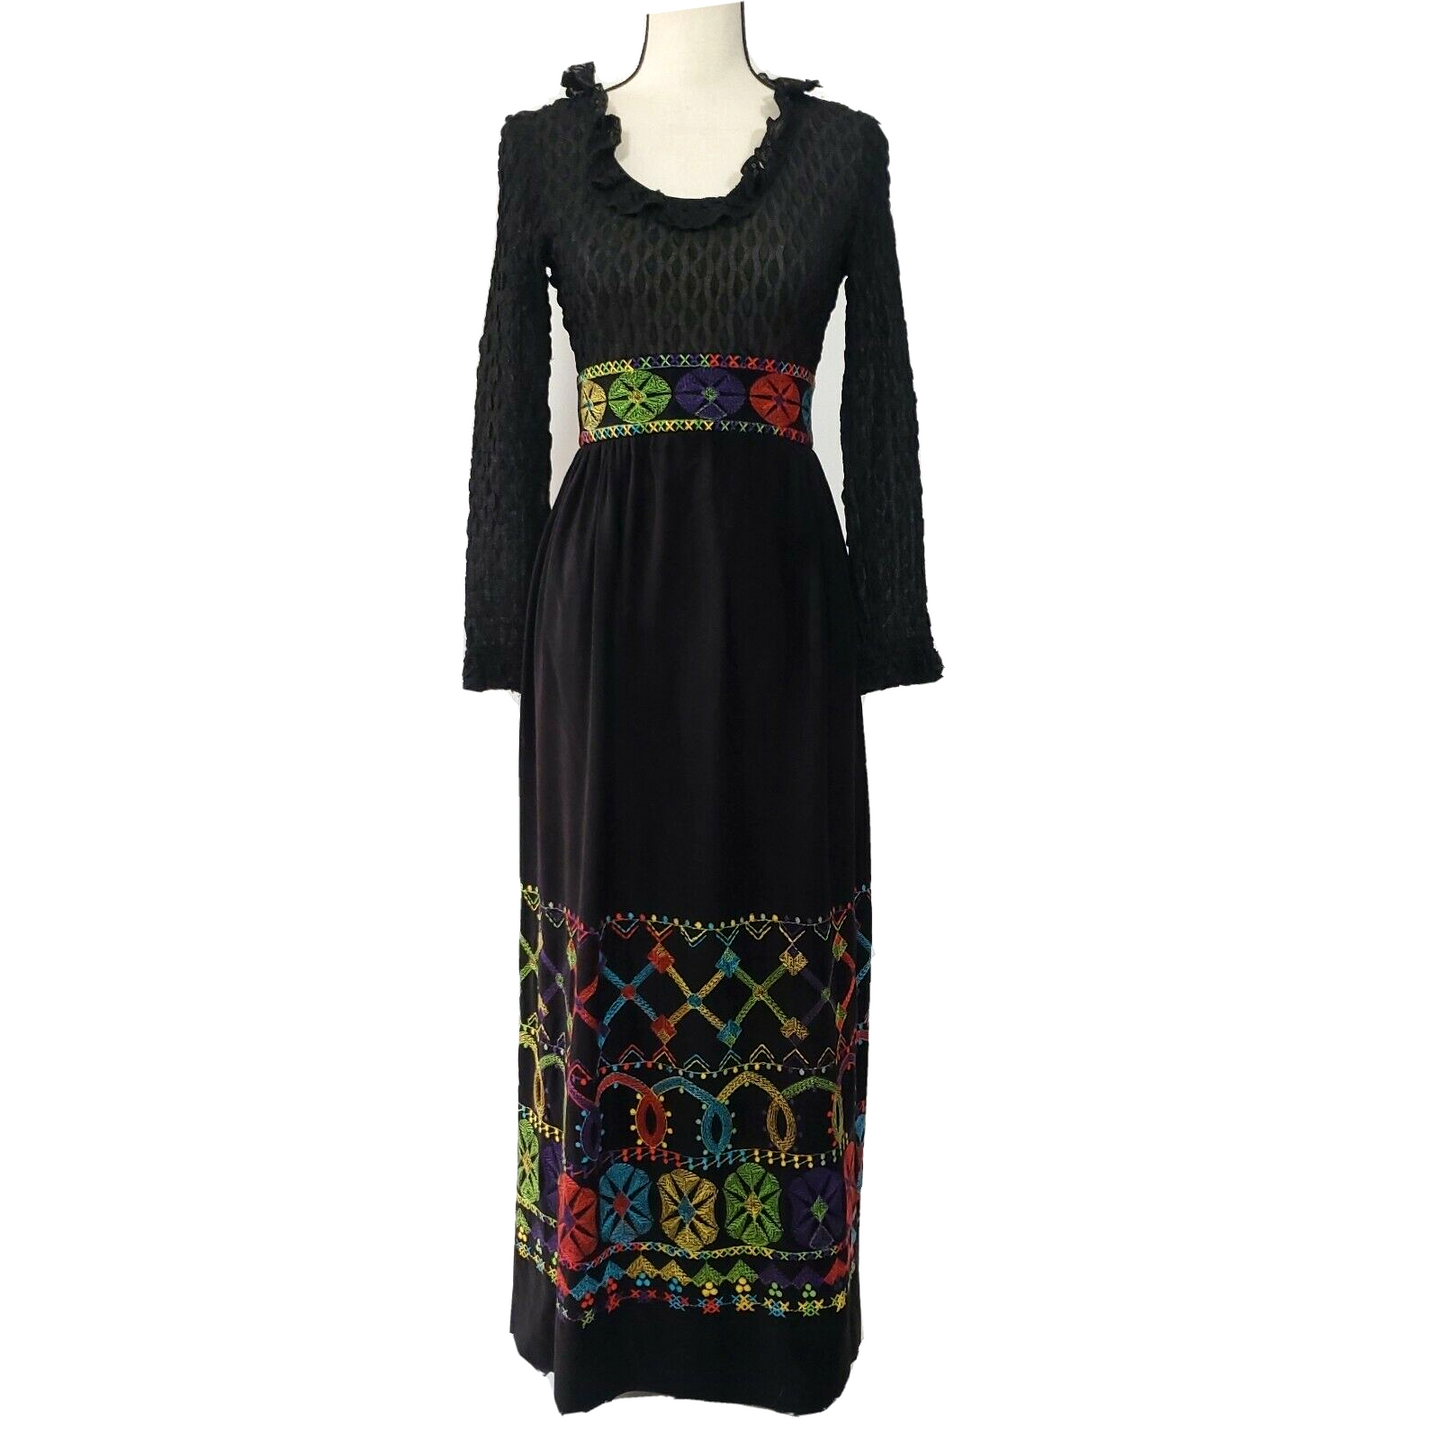 Black Embroidered Empire Waist Maxi Dress  - Size Small